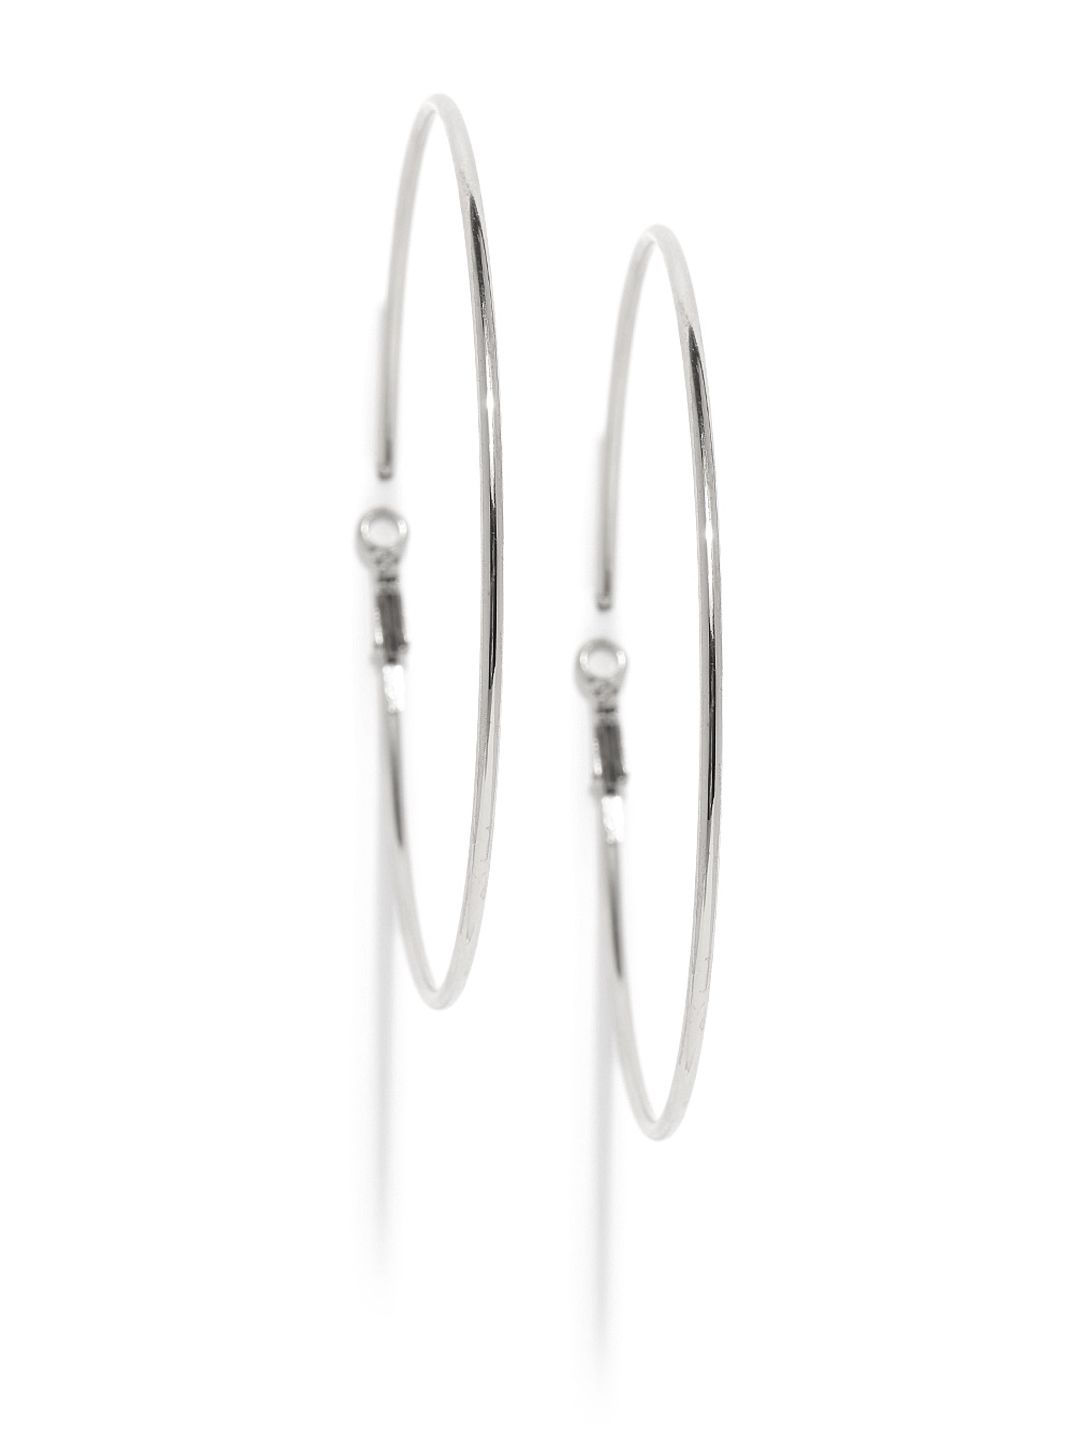 Accessorize Silver-Toned Hoop Earrings Price in India